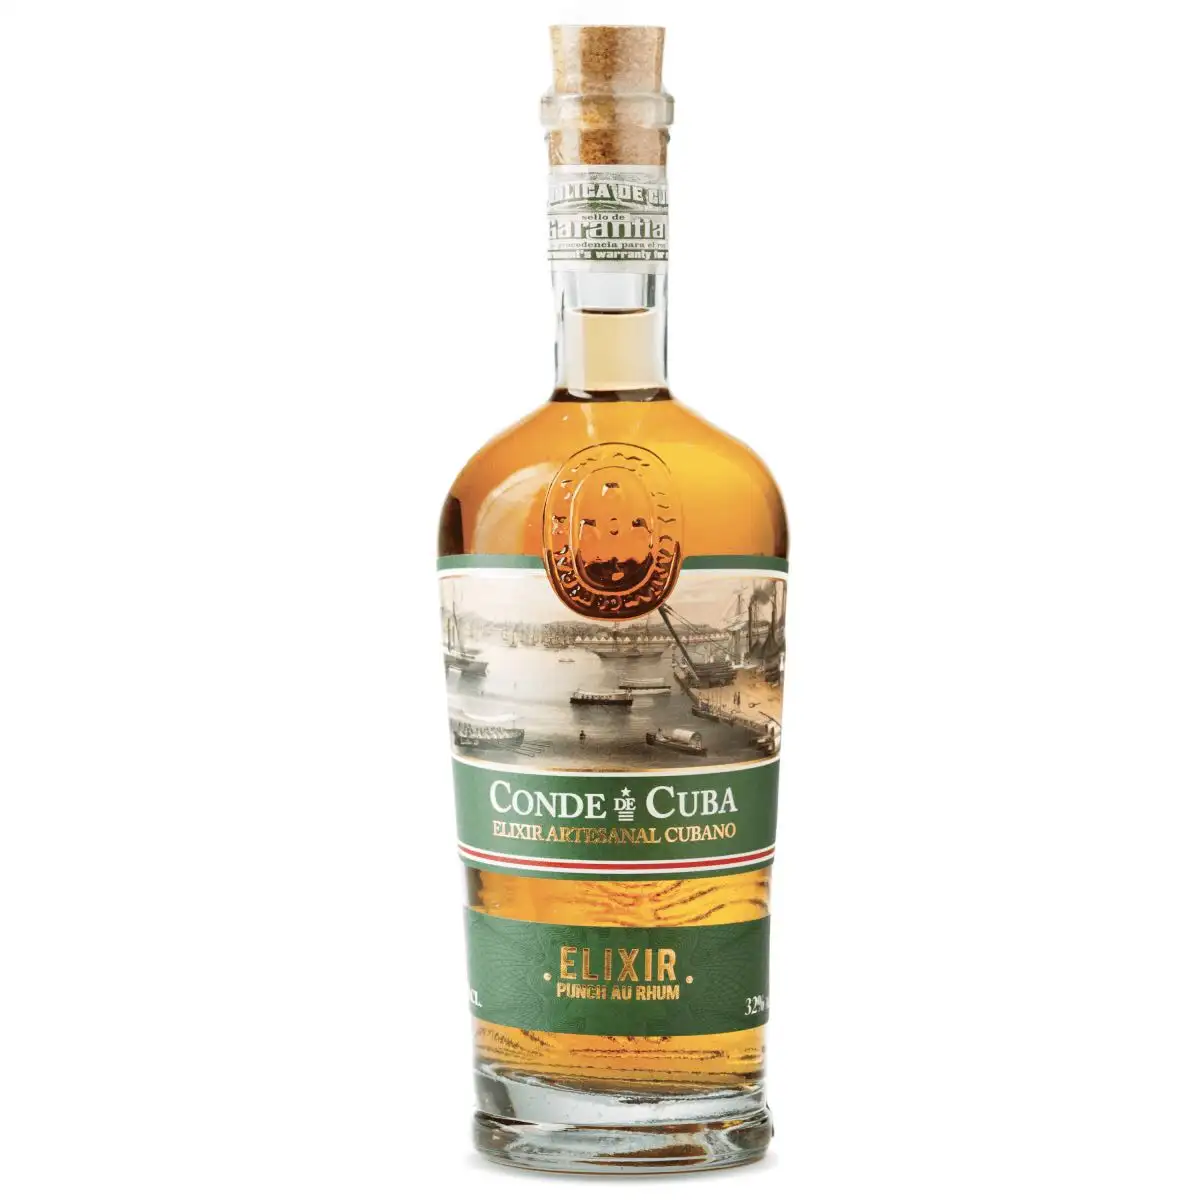 Image of the front of the bottle of the rum Elixir